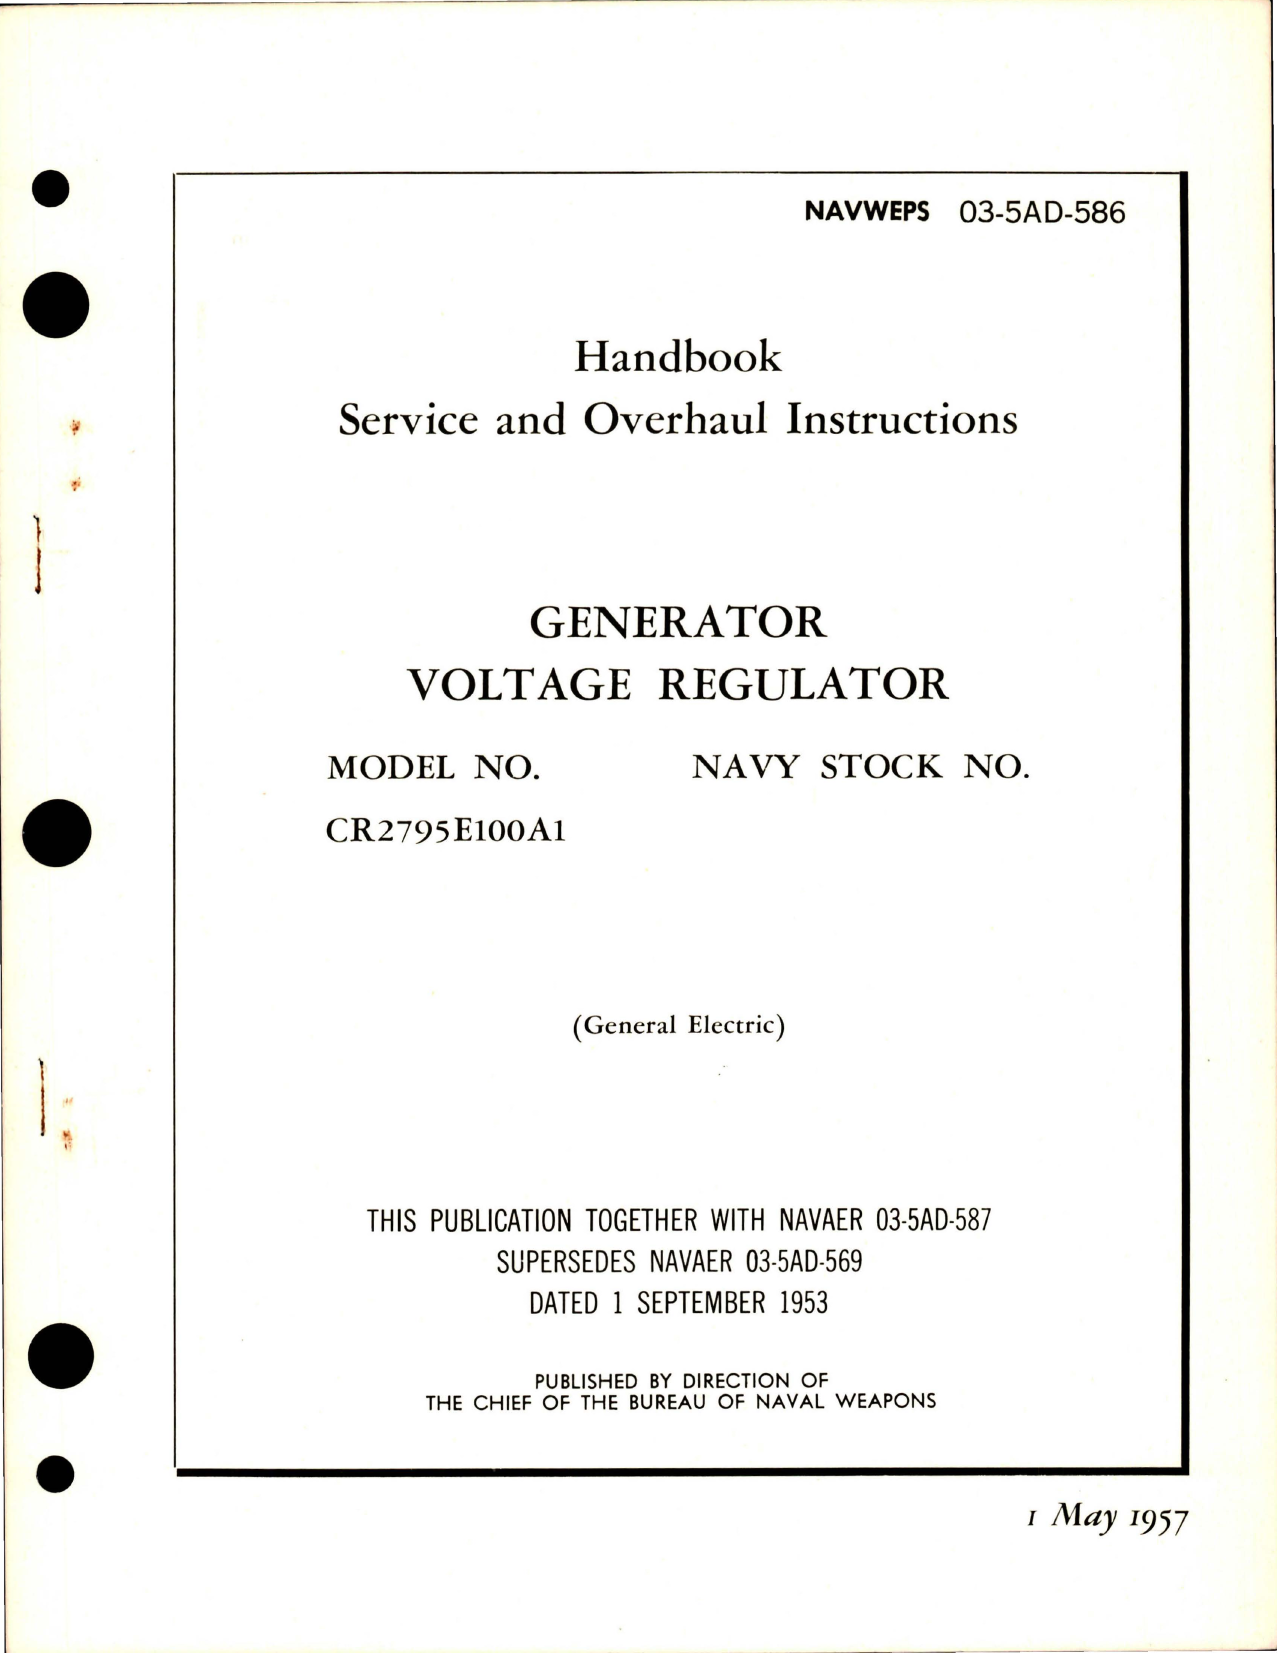 Sample page 1 from AirCorps Library document: Service and Overhaul Instructions for Generator Voltage Regulator - Model CR2795E100A1 